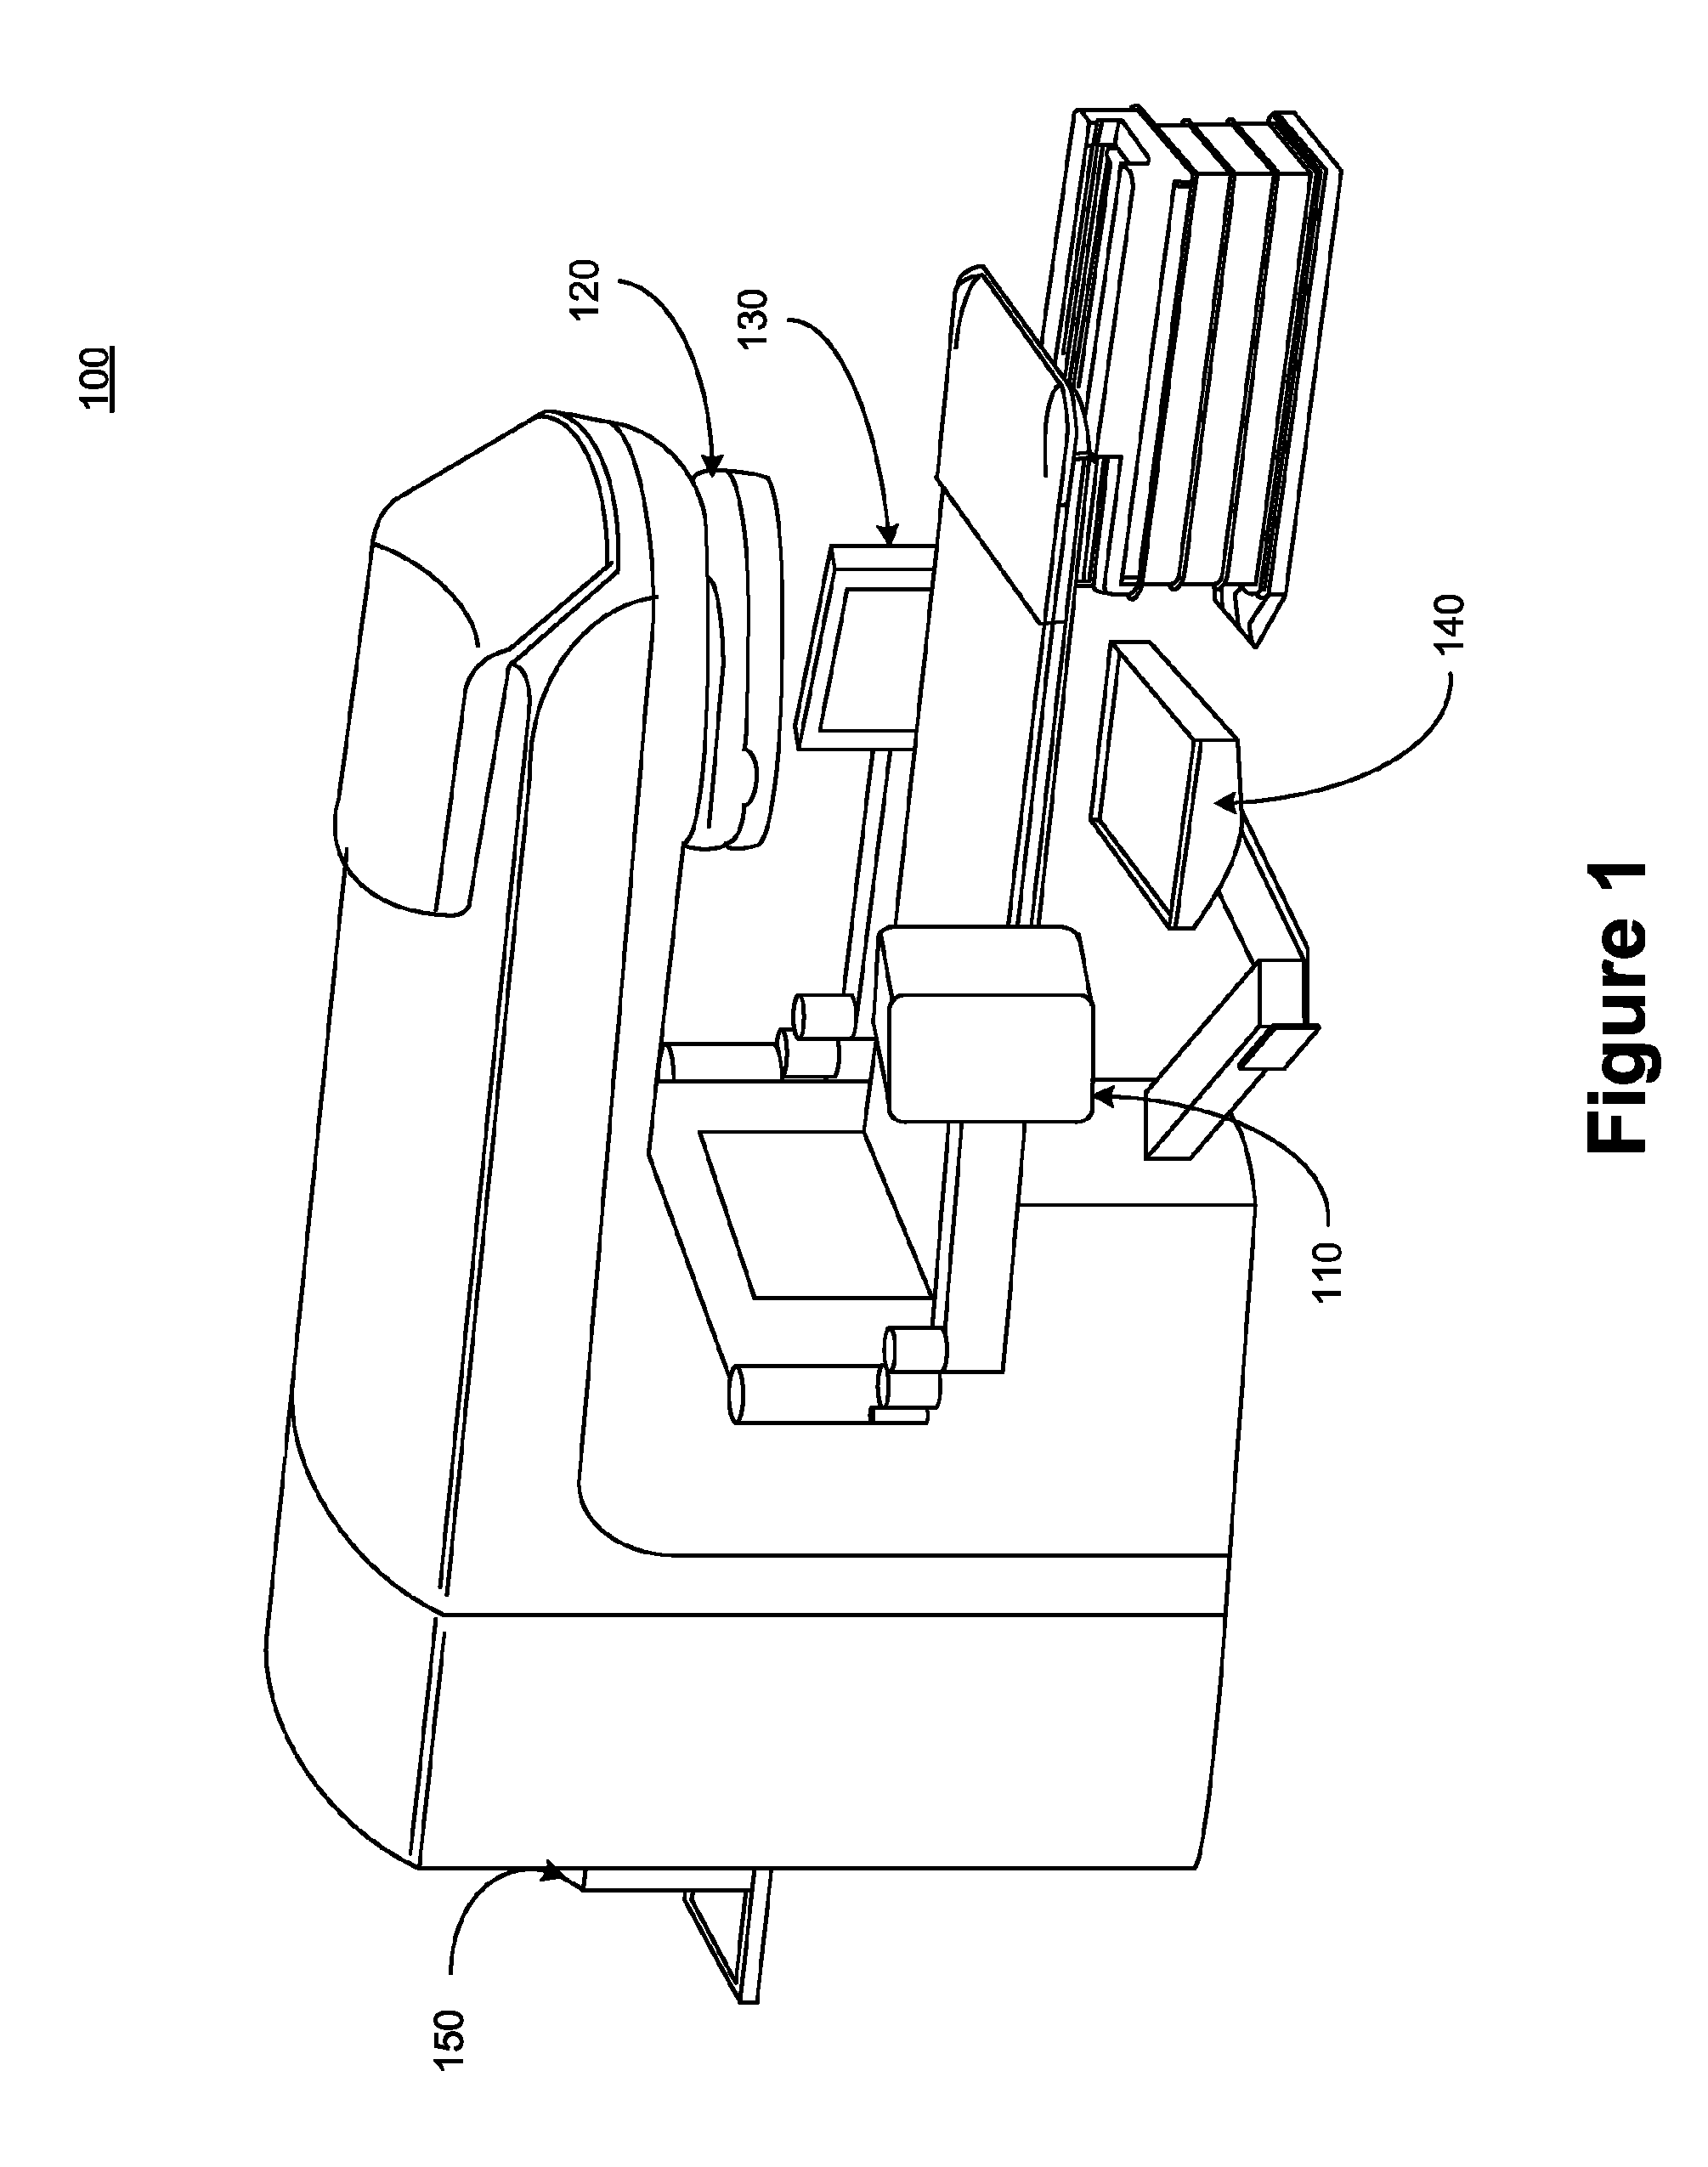 Method and apparatus for multi-layered high efficiency mega-voltage imager